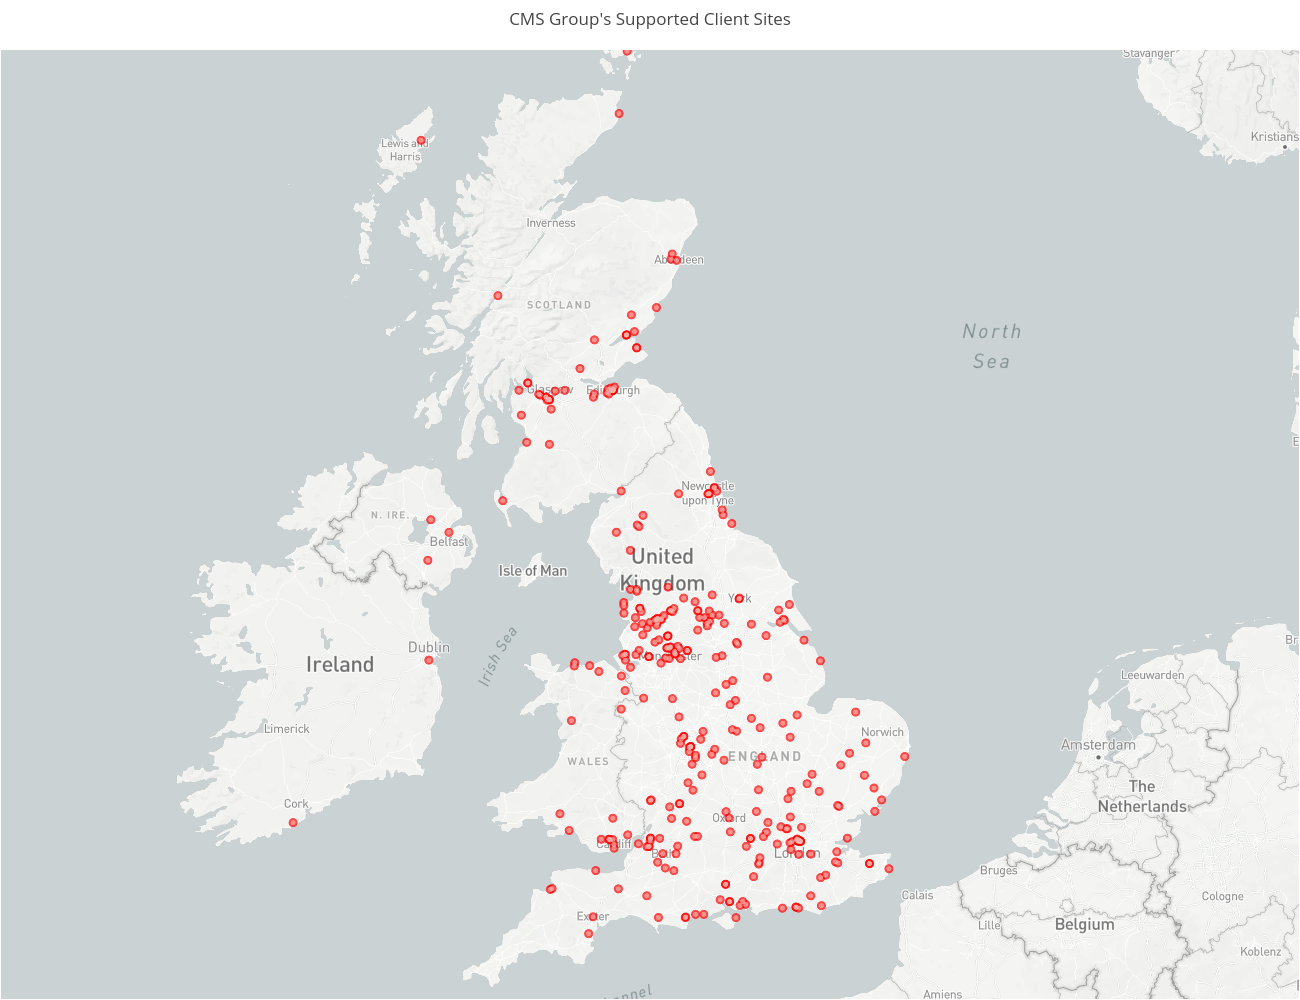 CMS Group's Supported Client Sites | scattermapbox made by Ohcoop | plotly